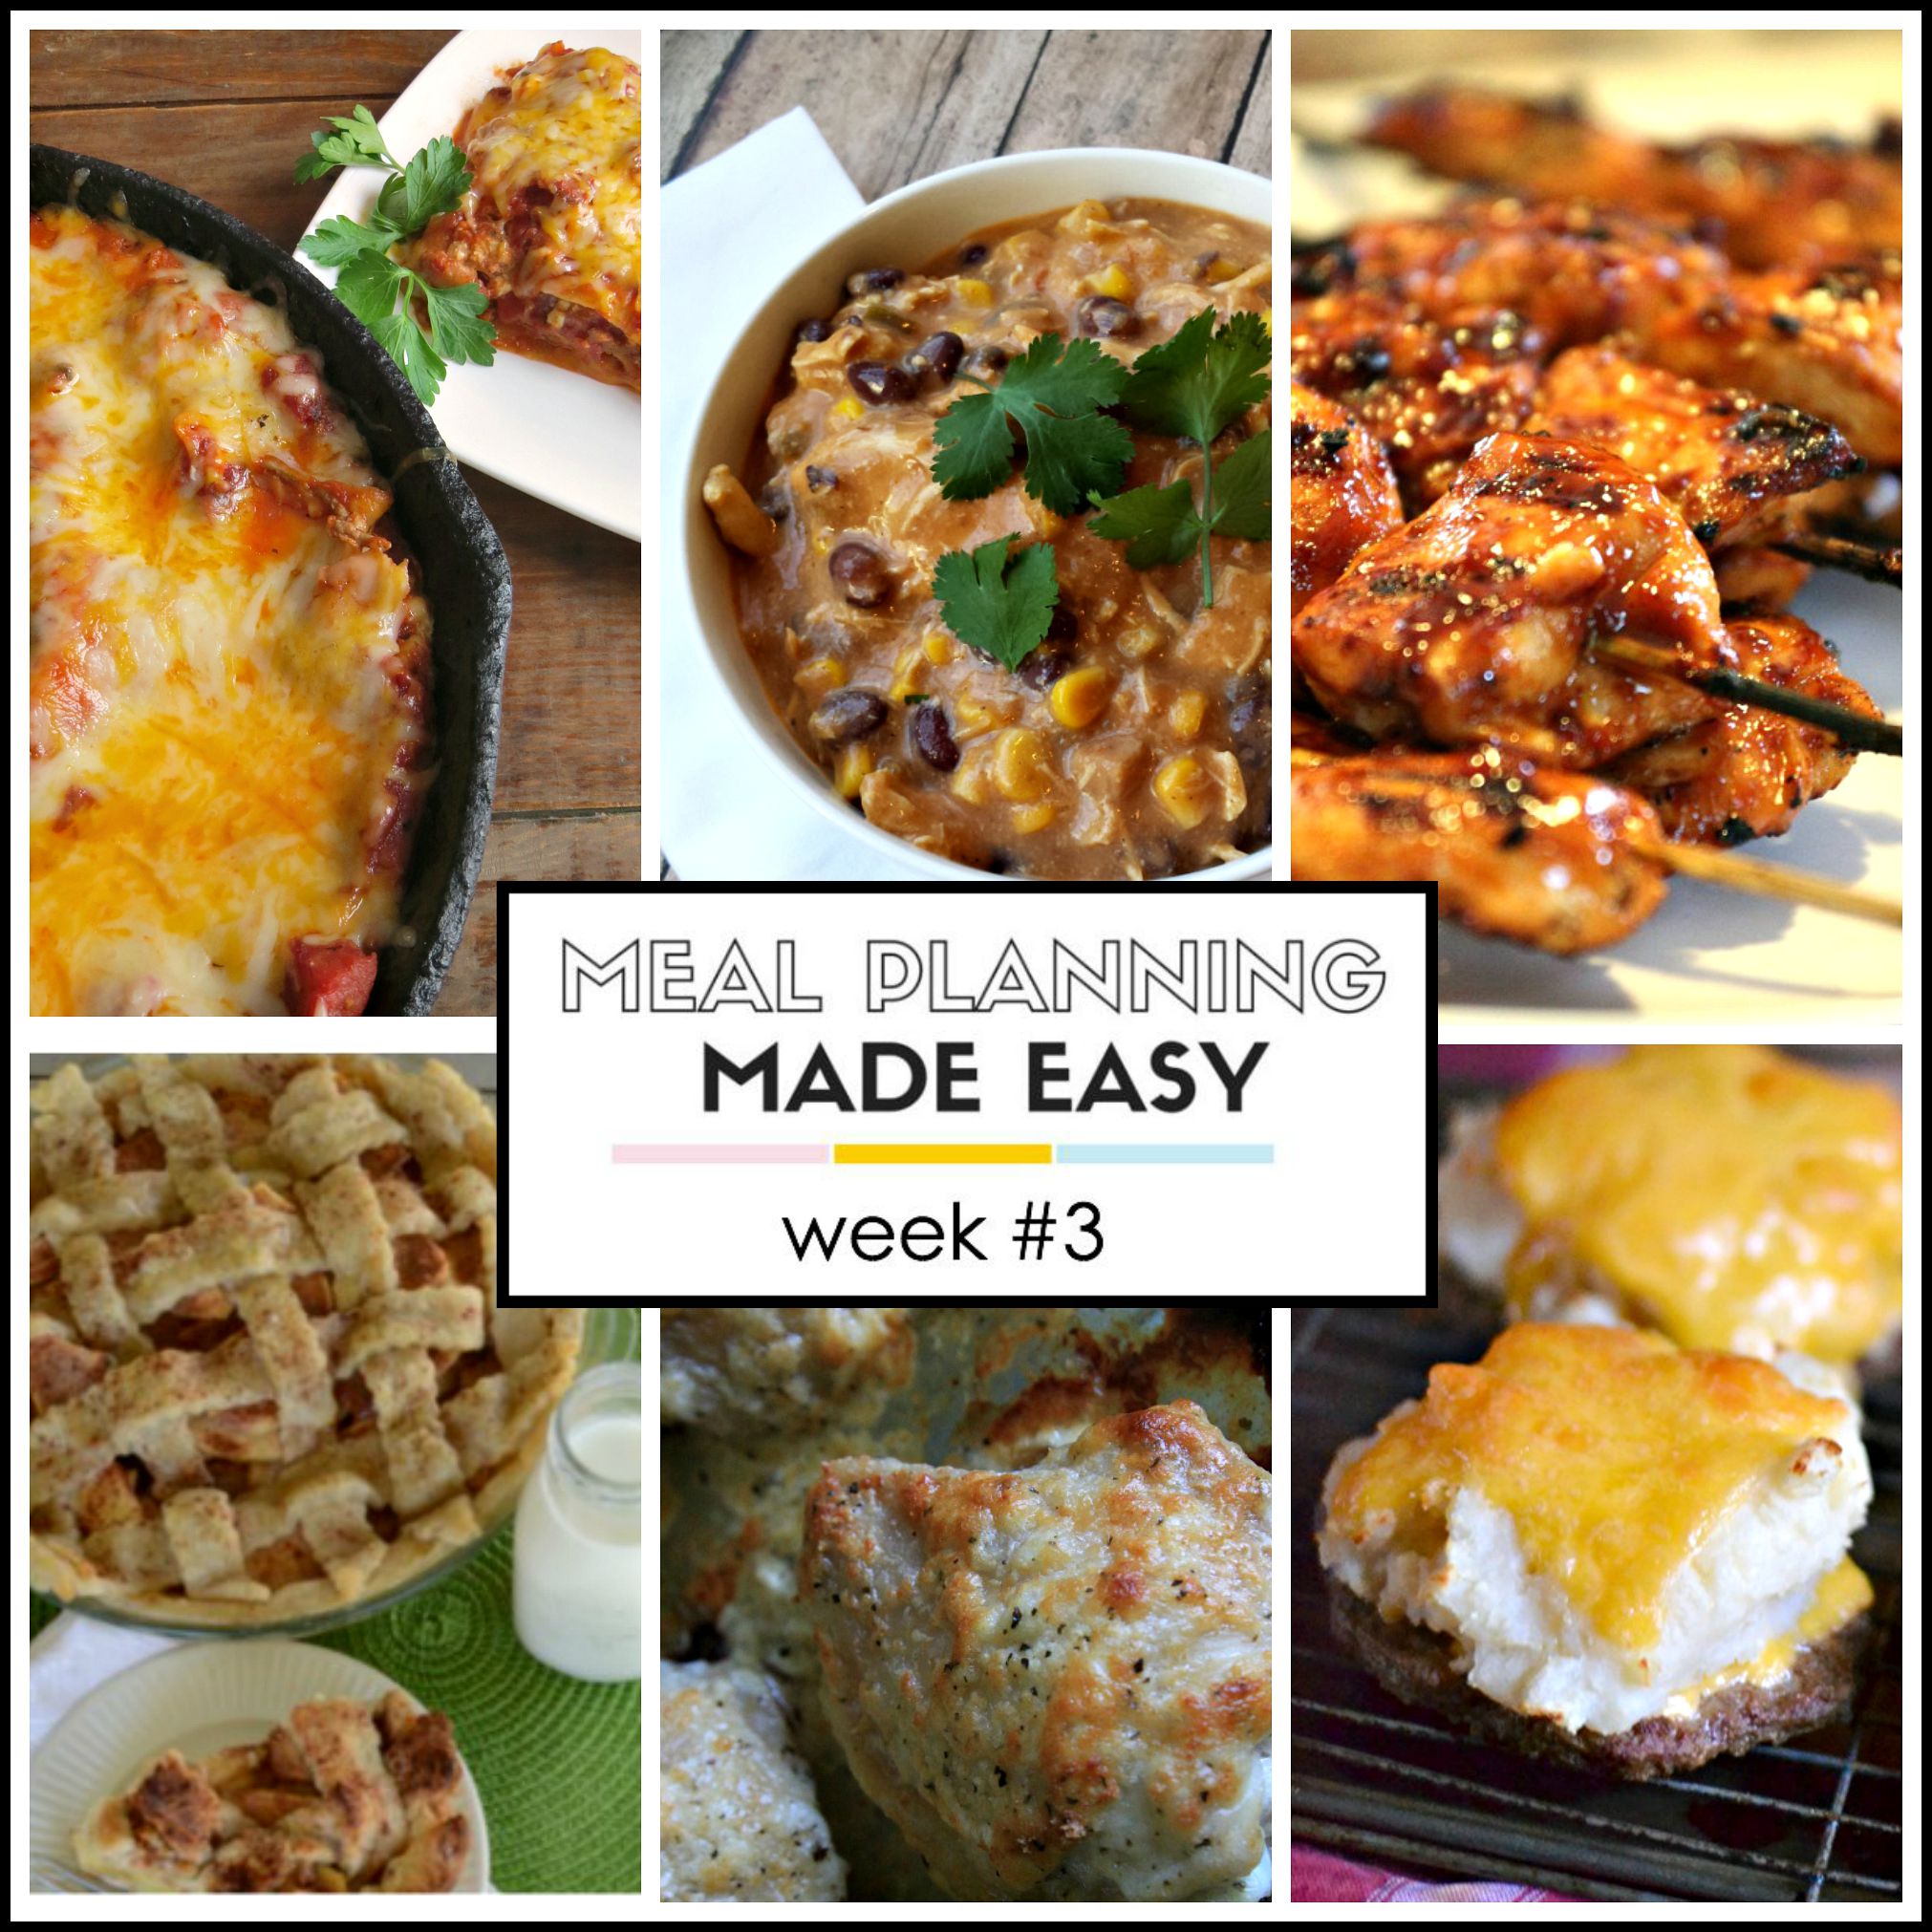 Meal Planning Made Easy Week #3 - Written Reality